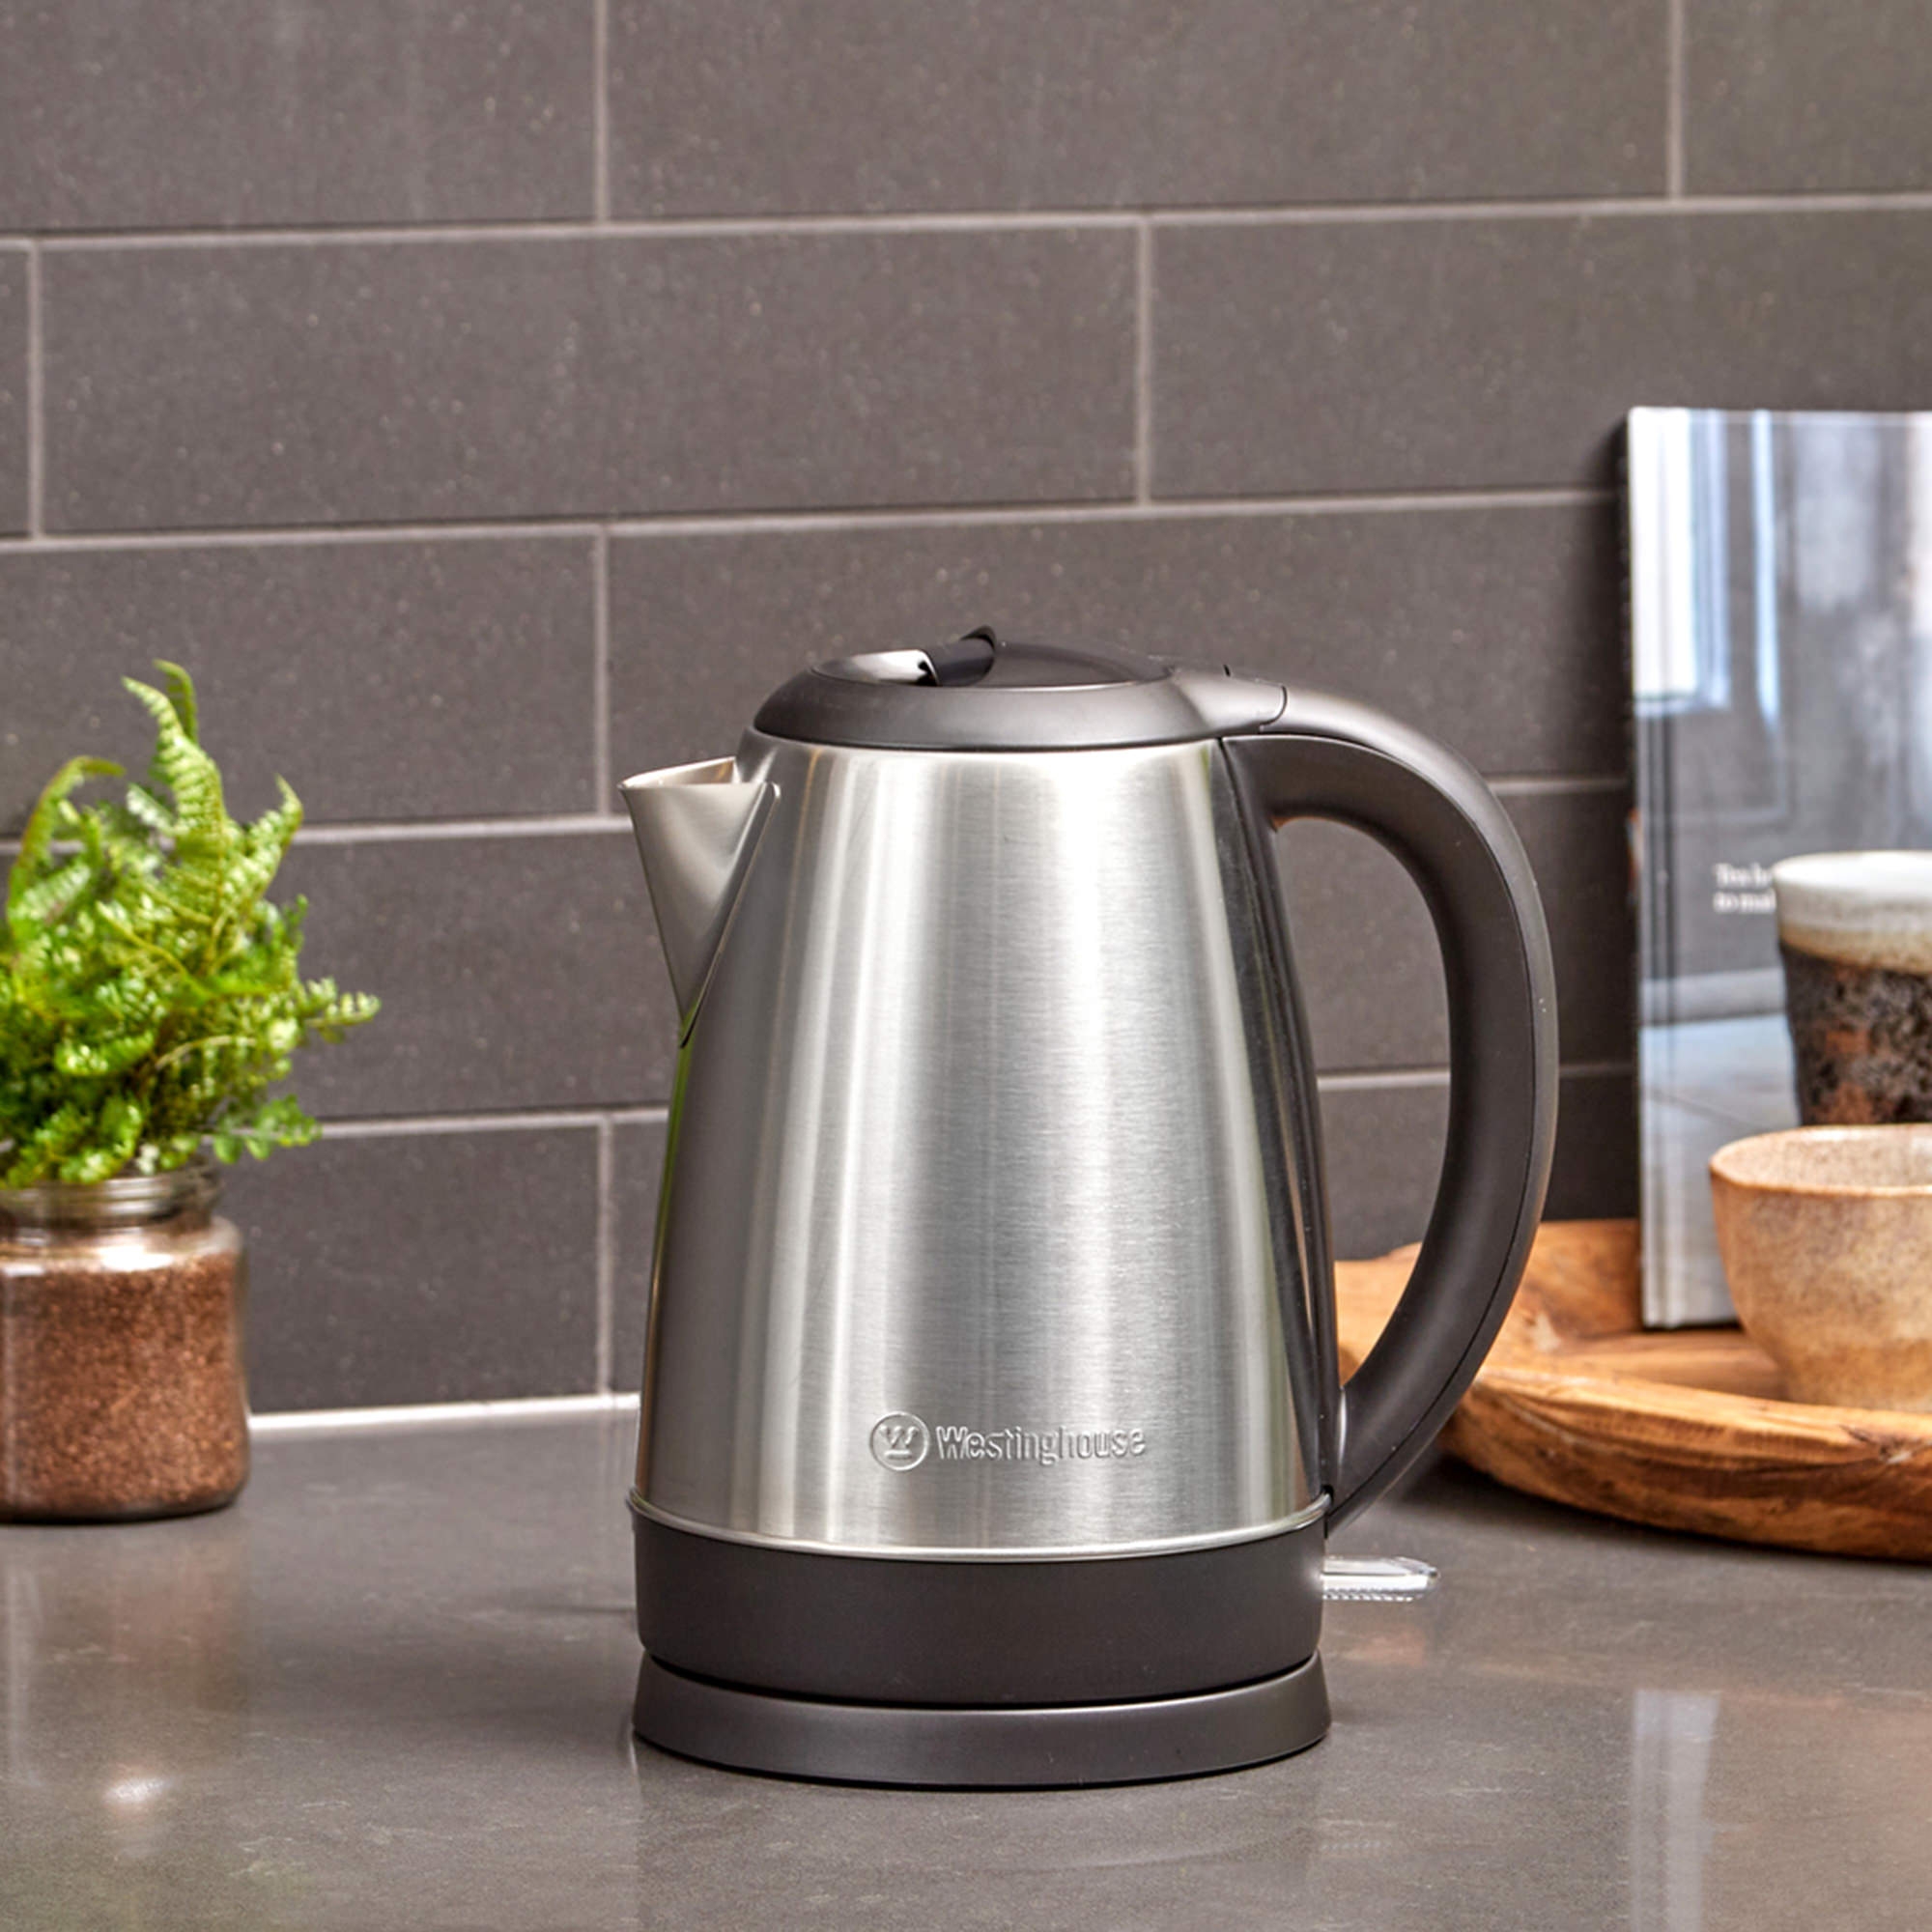 Westinghouse Stainless Steel Electric Kettle 1.7L Image 2